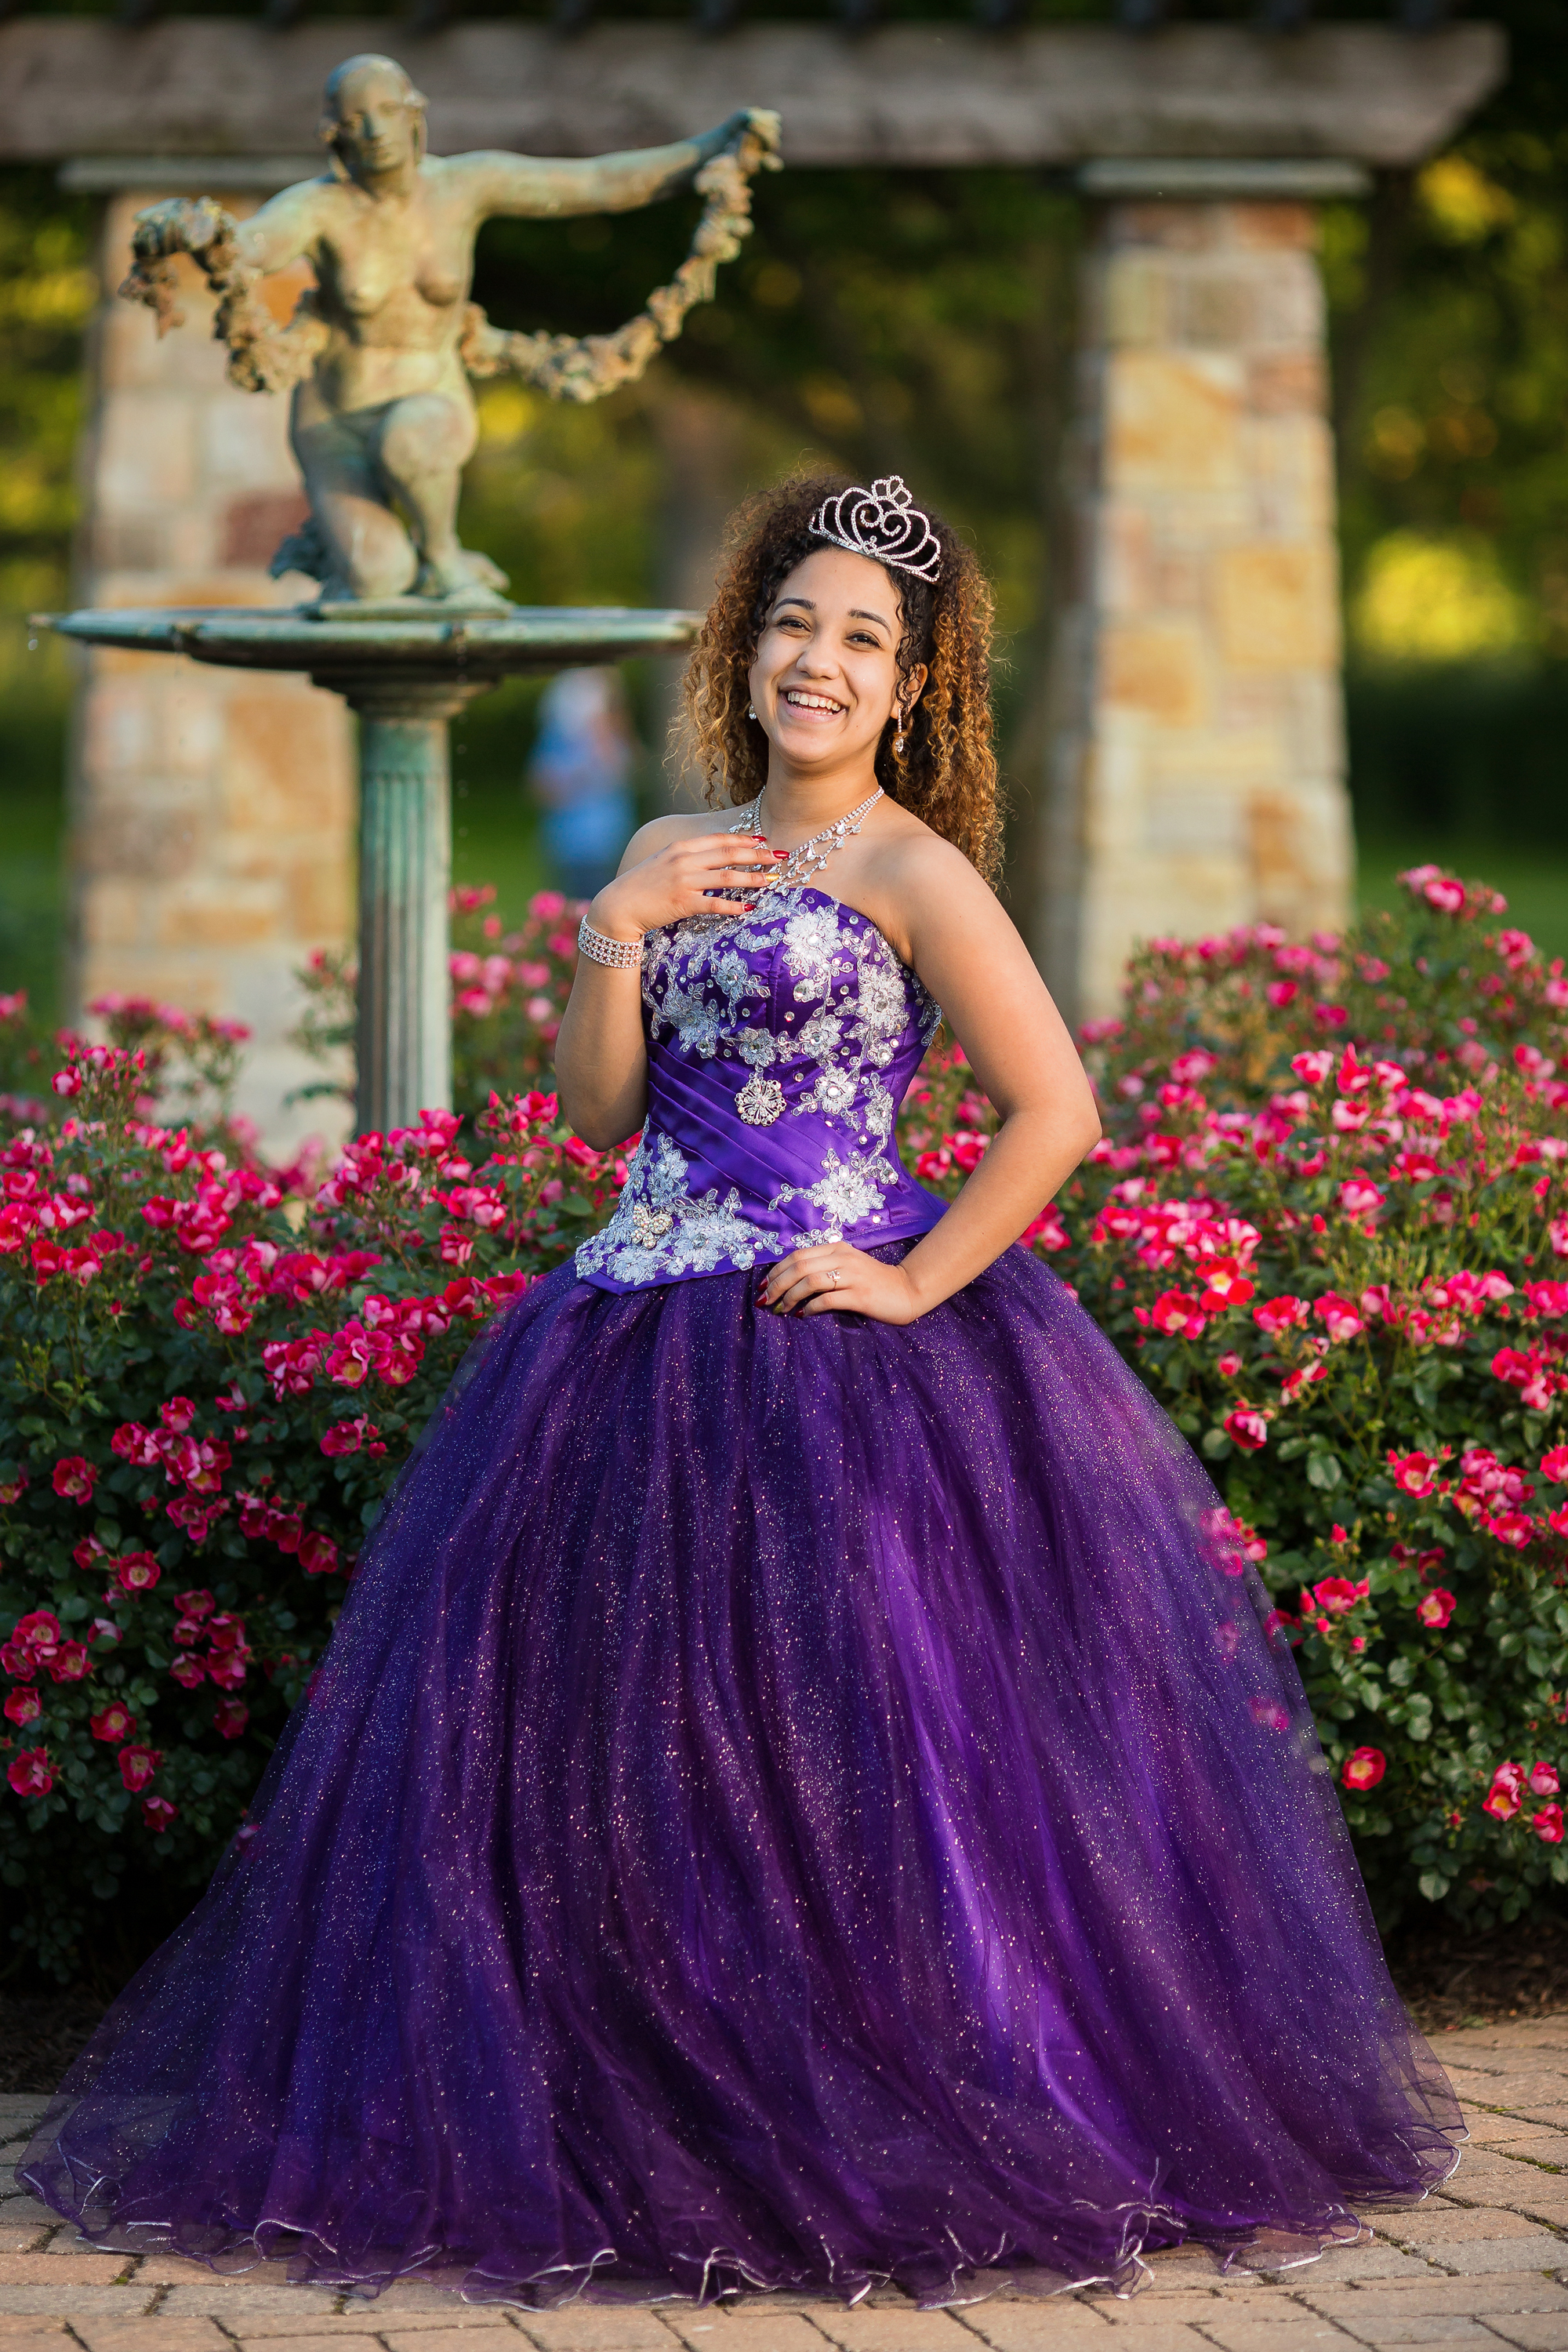 Natalias-Quince-Session-Garcia-Photography-2236-2.jpg